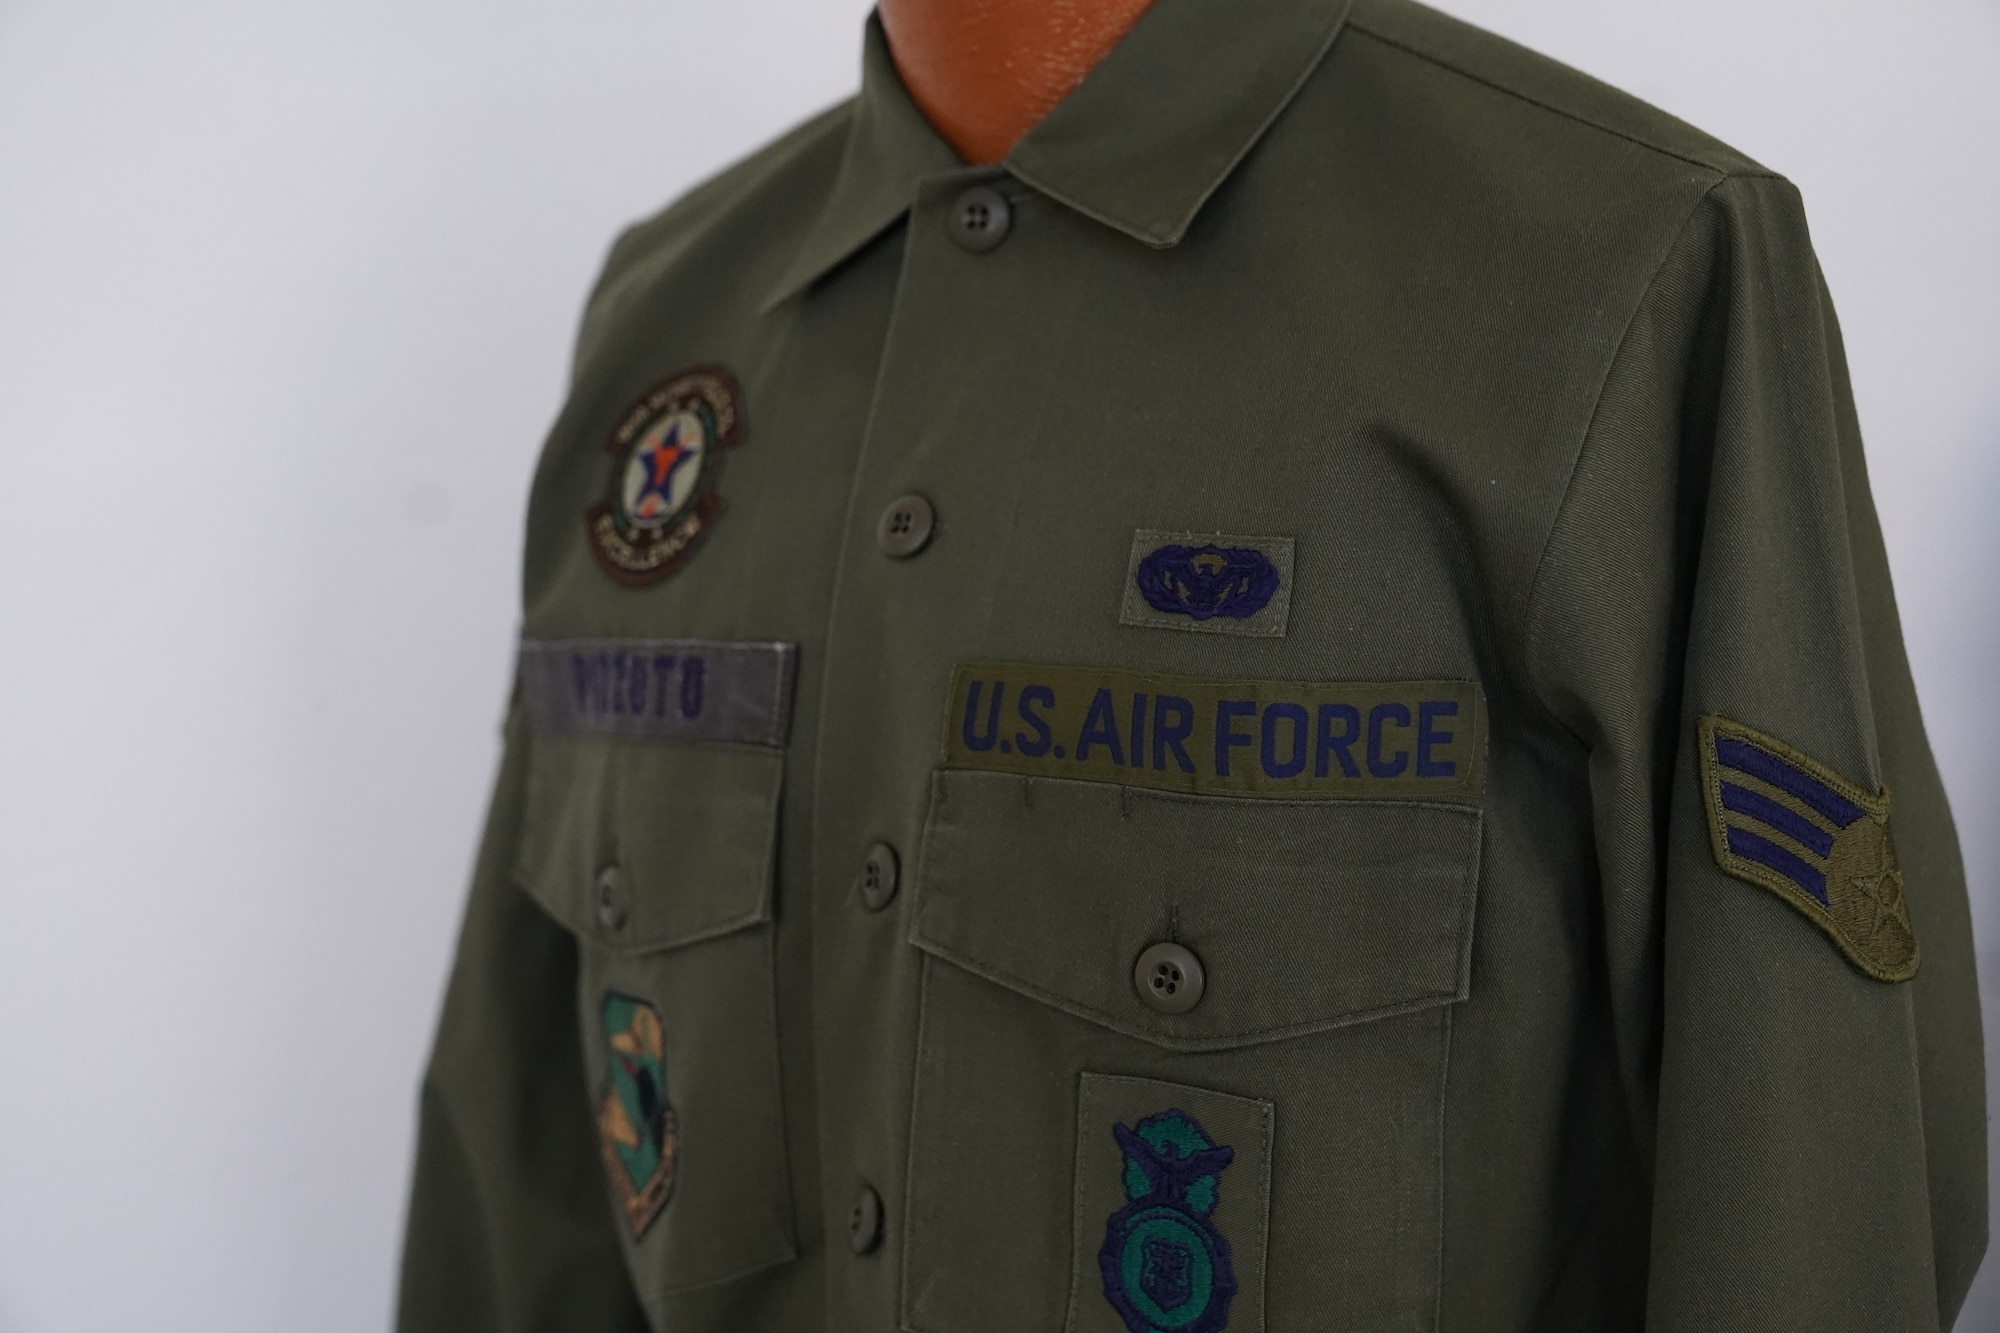 A Cotton Sateen Utility uniform owned by Chief Master Sgt. David Pizzuto, 81st Training Wing command chief, is displayed inside of the Levitow Training Support Facility at Keesler Air Force Base, Mississippi, May 6, 2020. Pizzuto, who is slated to retire this month, has served for 37 years and has worn every uniform the Air Force has ever known. (U.S. Air Force photo by Airman 1st Class Spencer Tobler)